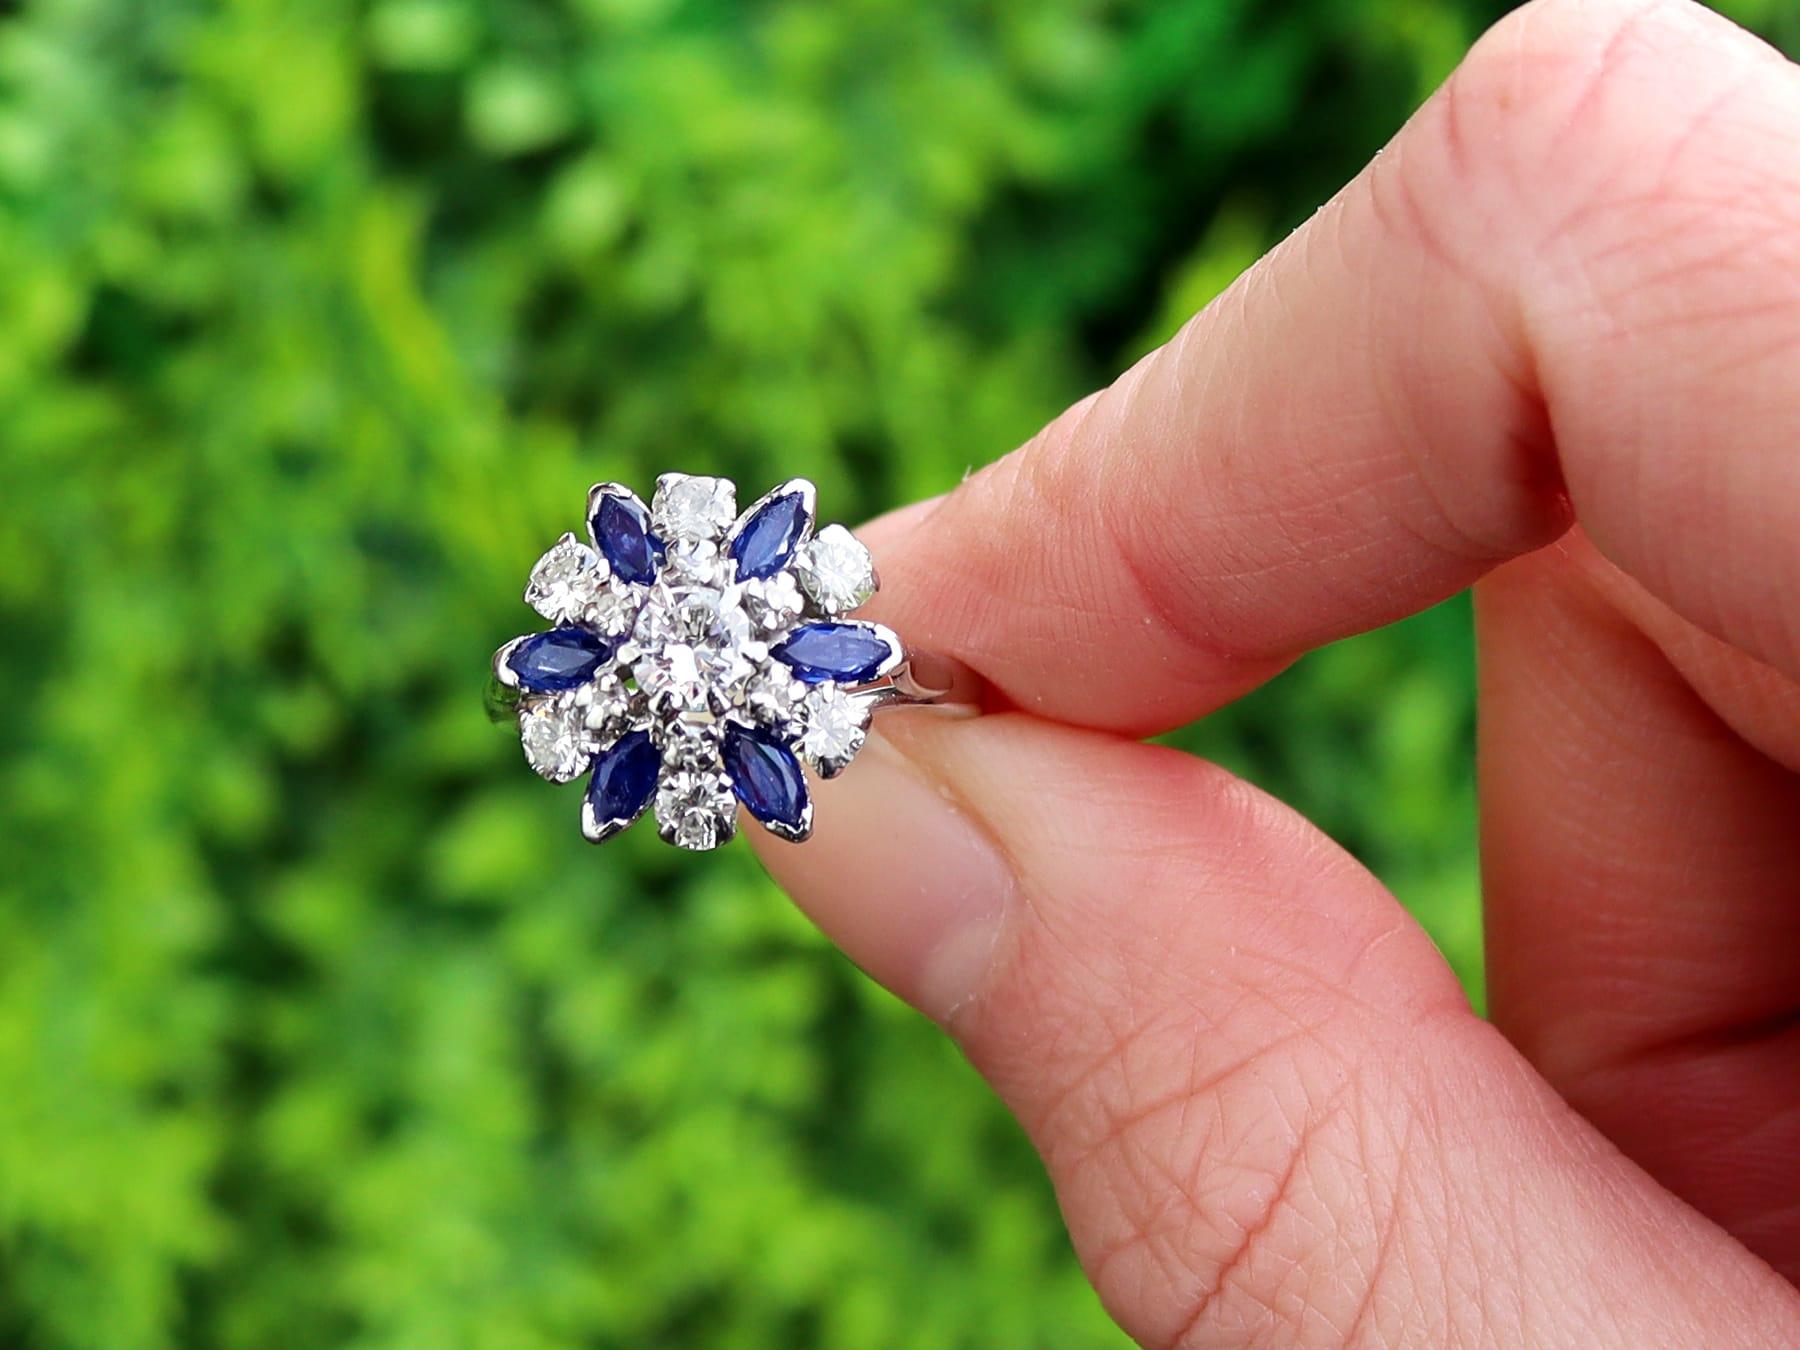 A stunning, fine and impressive vintage 1.10 carat natural blue sapphire and 1.20 carat diamond, 18 karat white gold, platinum set cluster ring; part of our vintage jewelry and estate jewelry collections.

This stunning, fine and impressive vintage